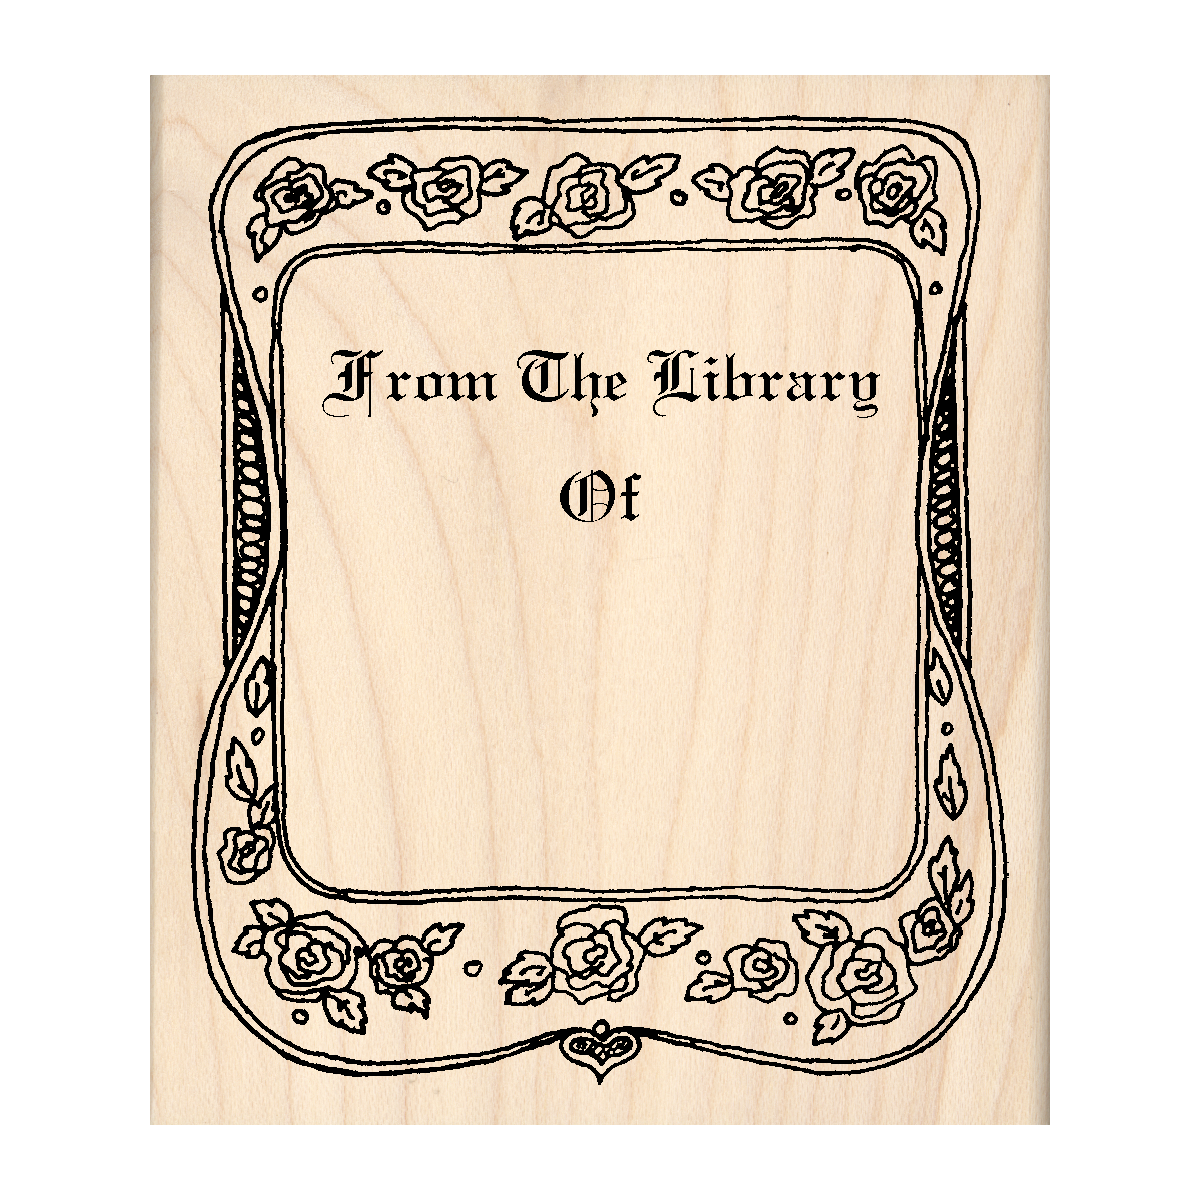 From The Library of: Bookplate Rubber Stamp 3" x 3.5" block